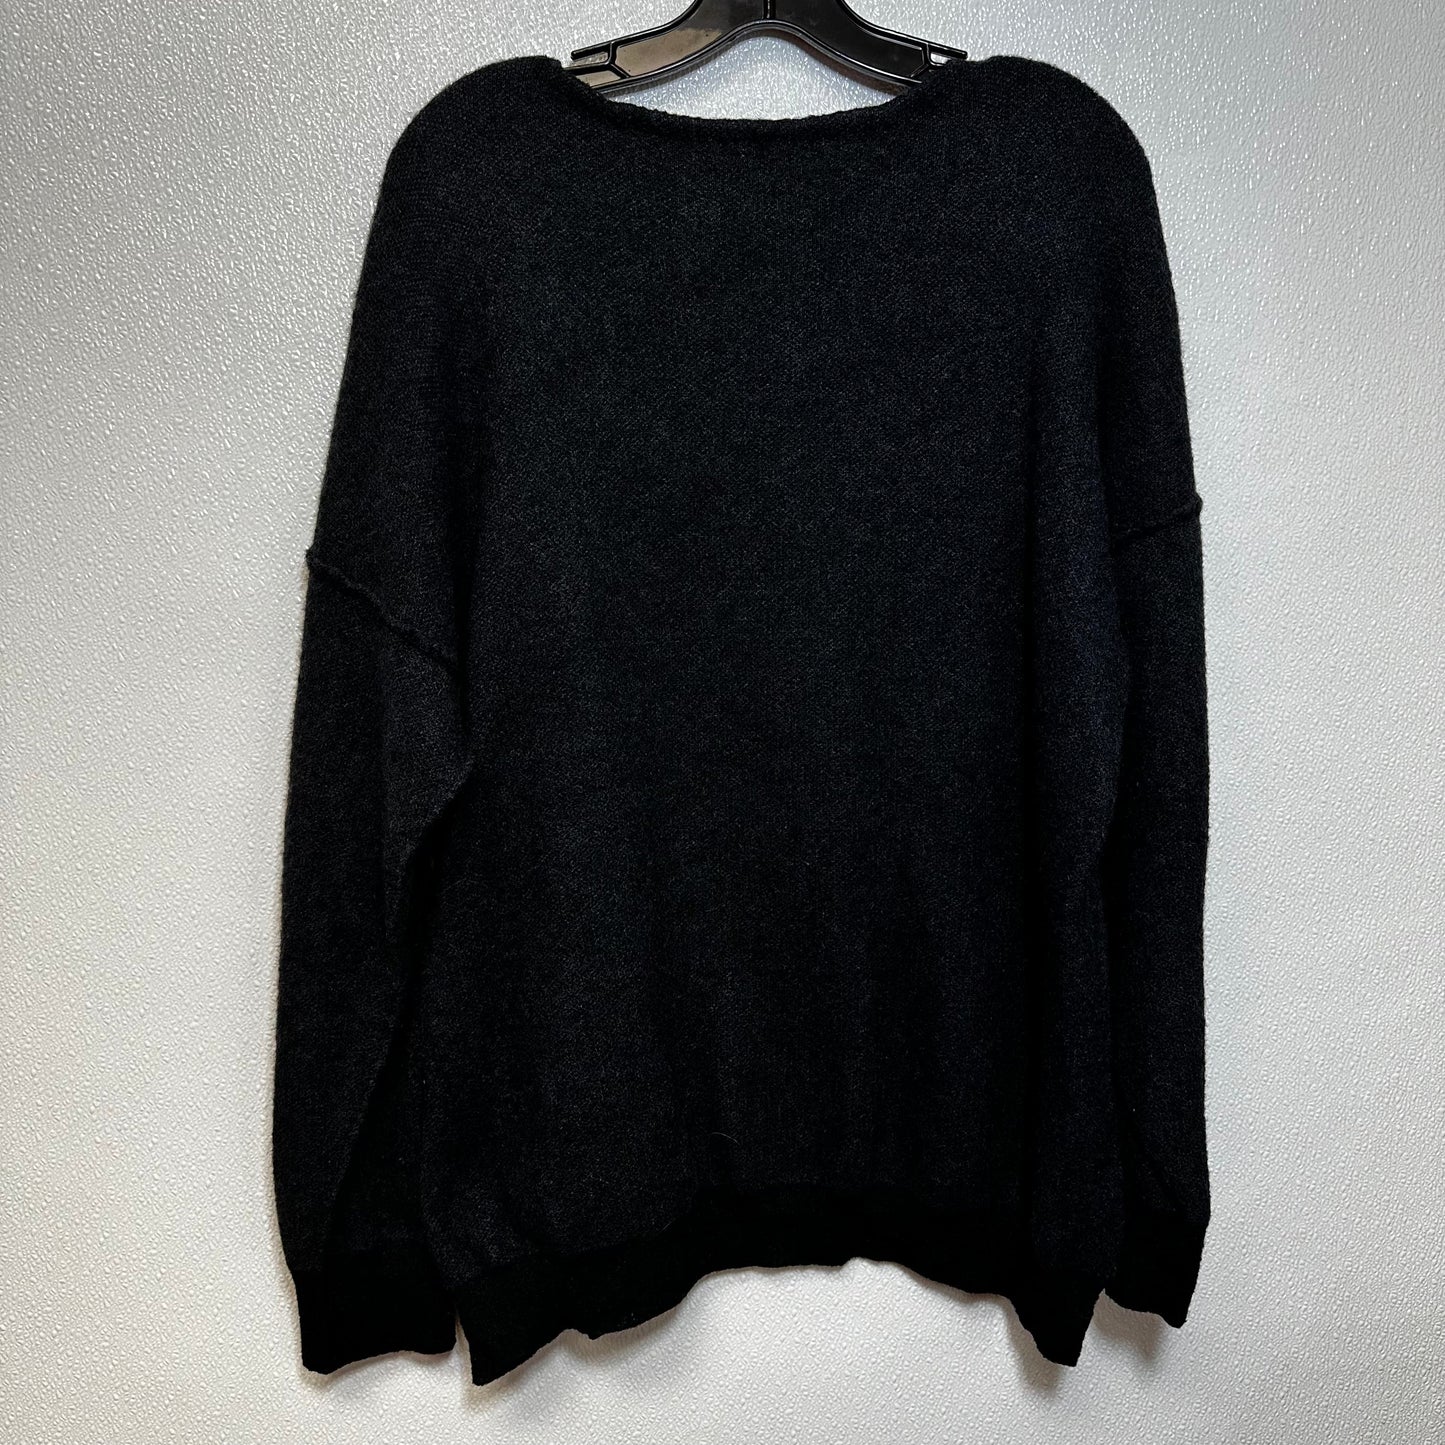 Charcoal Sweater Free People, Size S